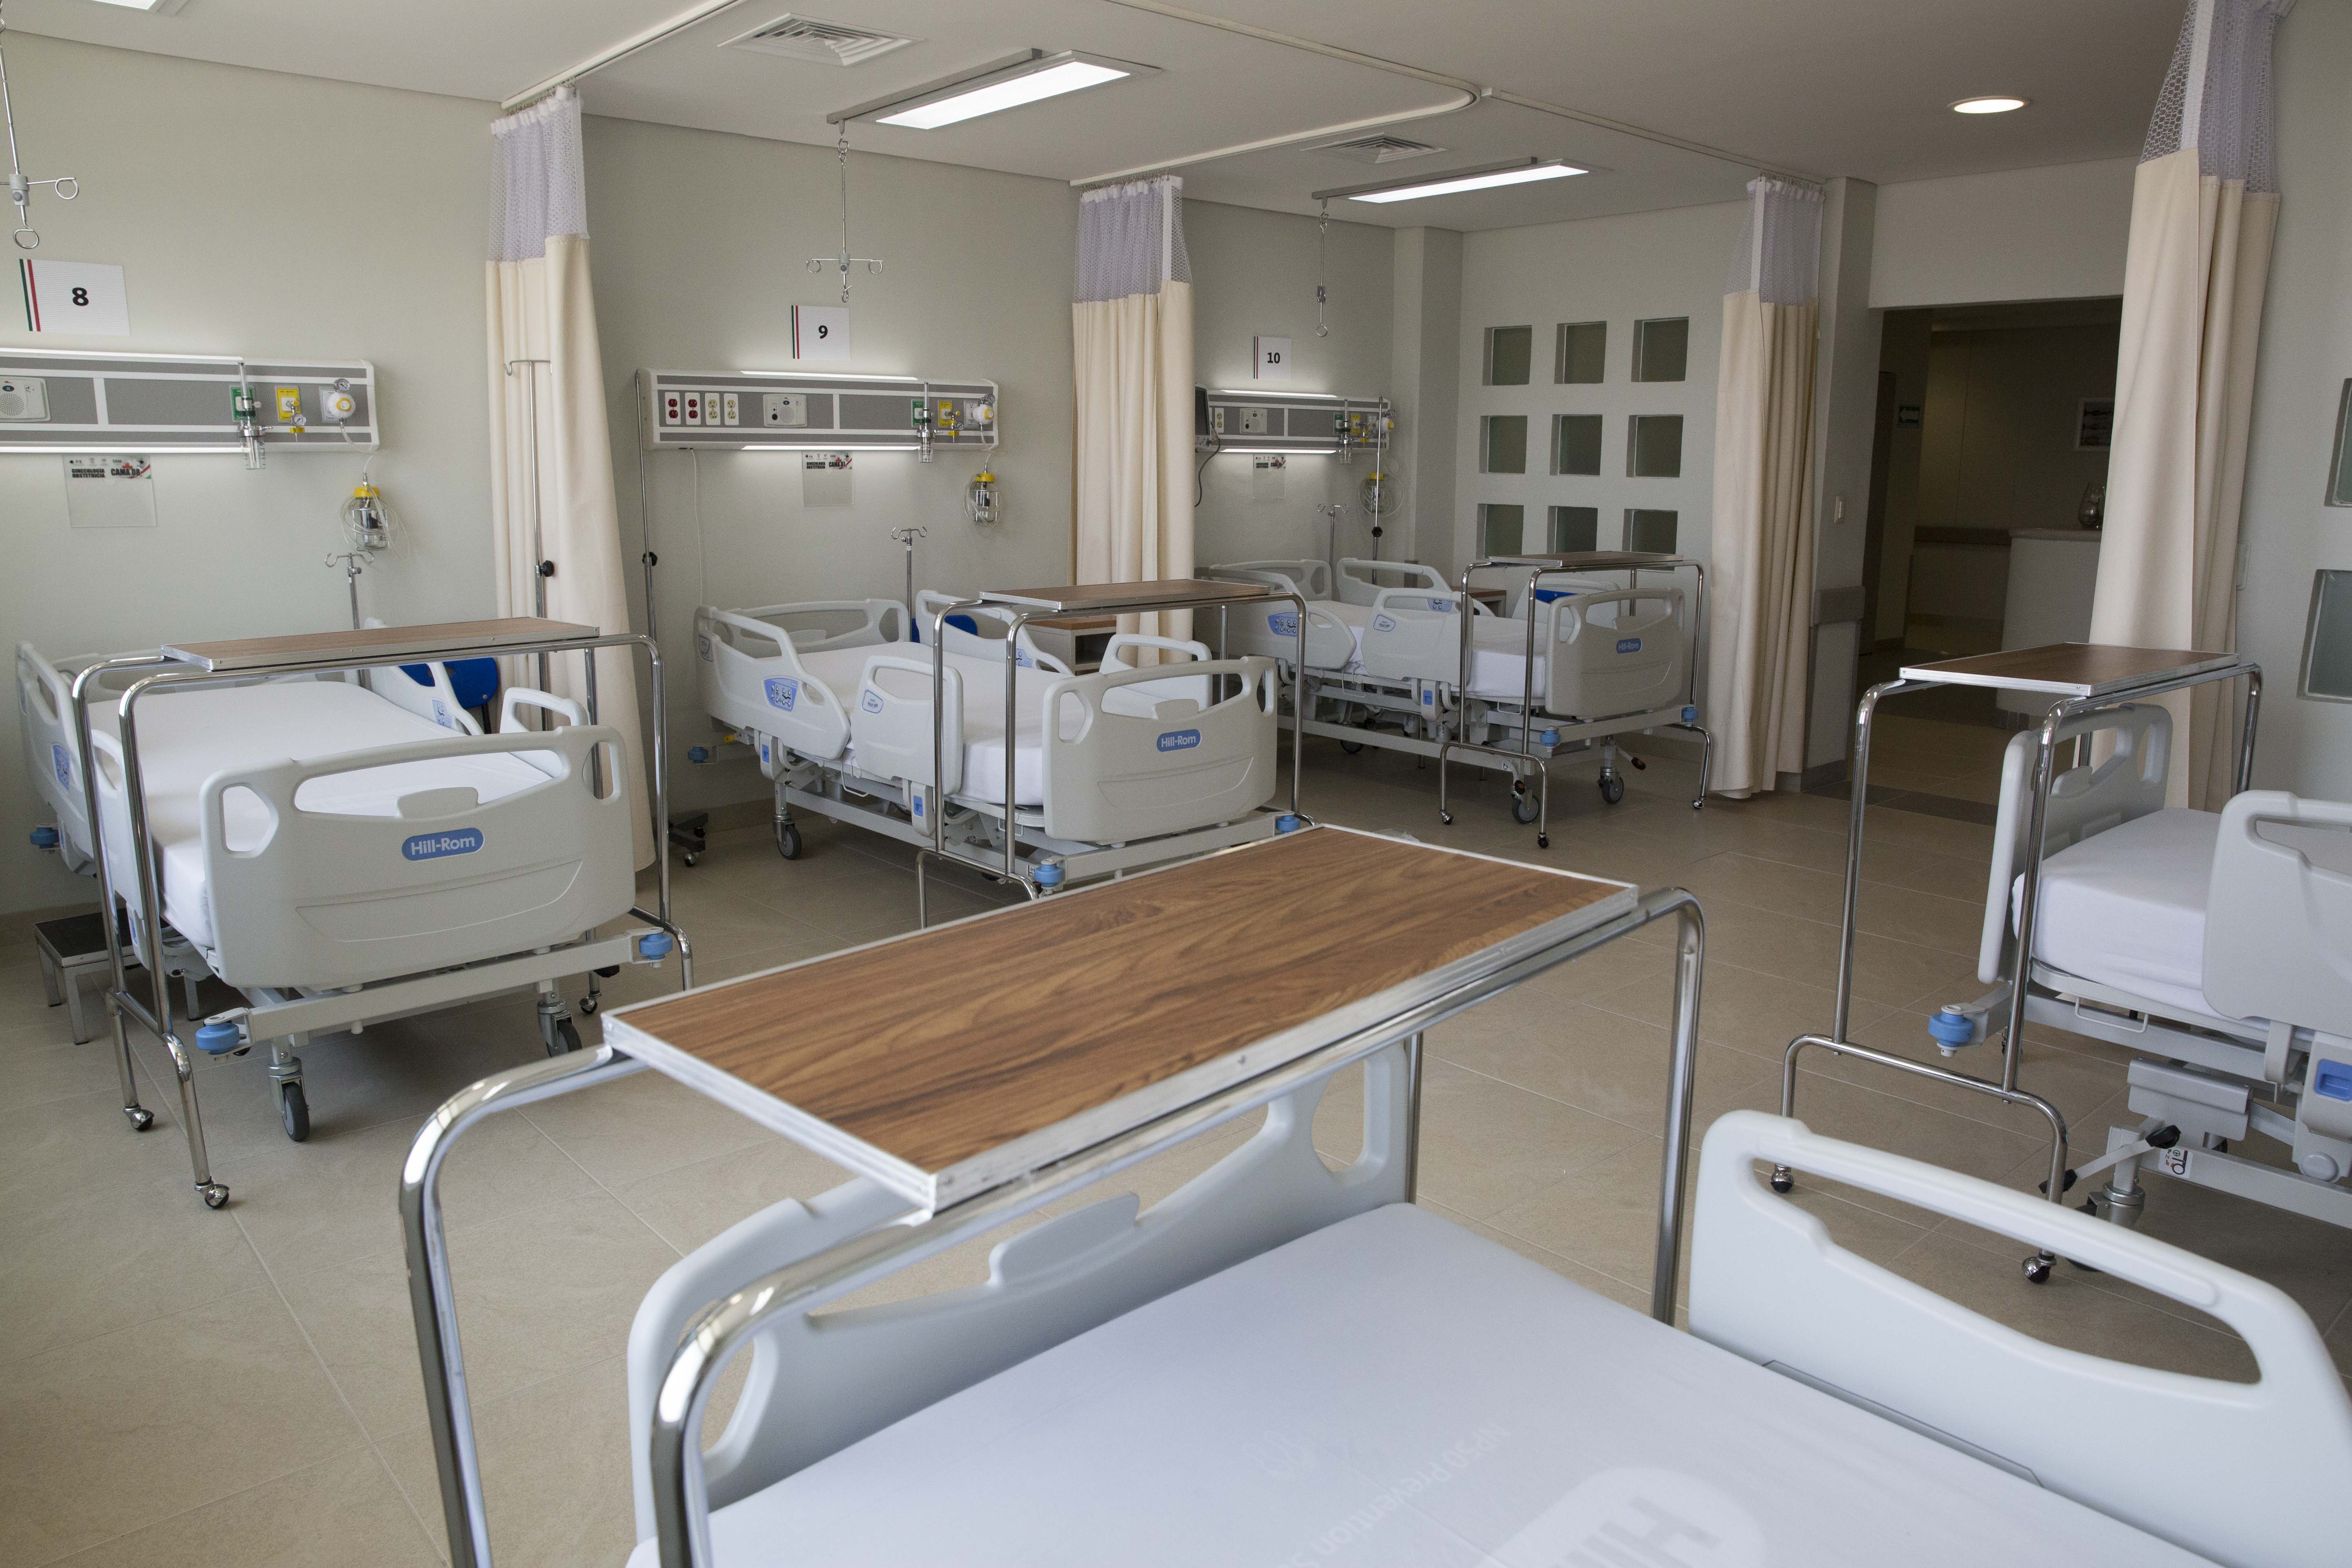 Hospital wing with several beds and equipment